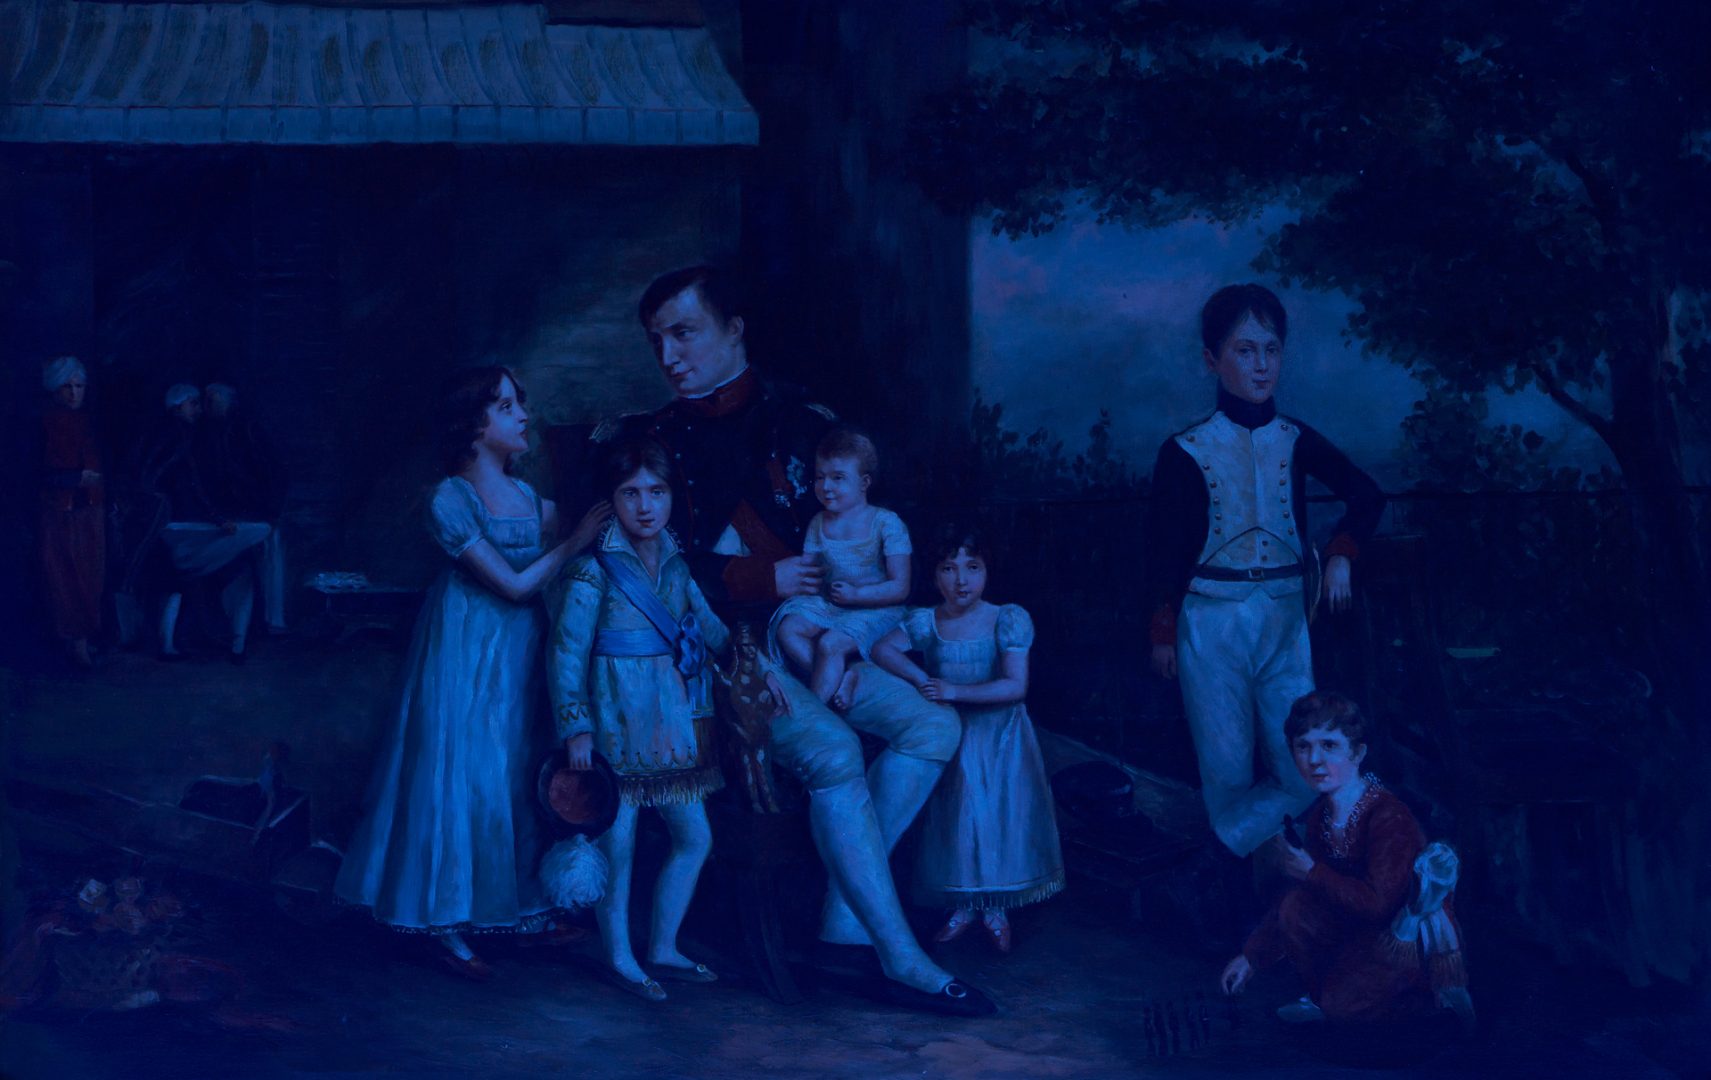 Lot 1164: After Louis Ducis O/C, Napoleon with his Nieces and Nephews